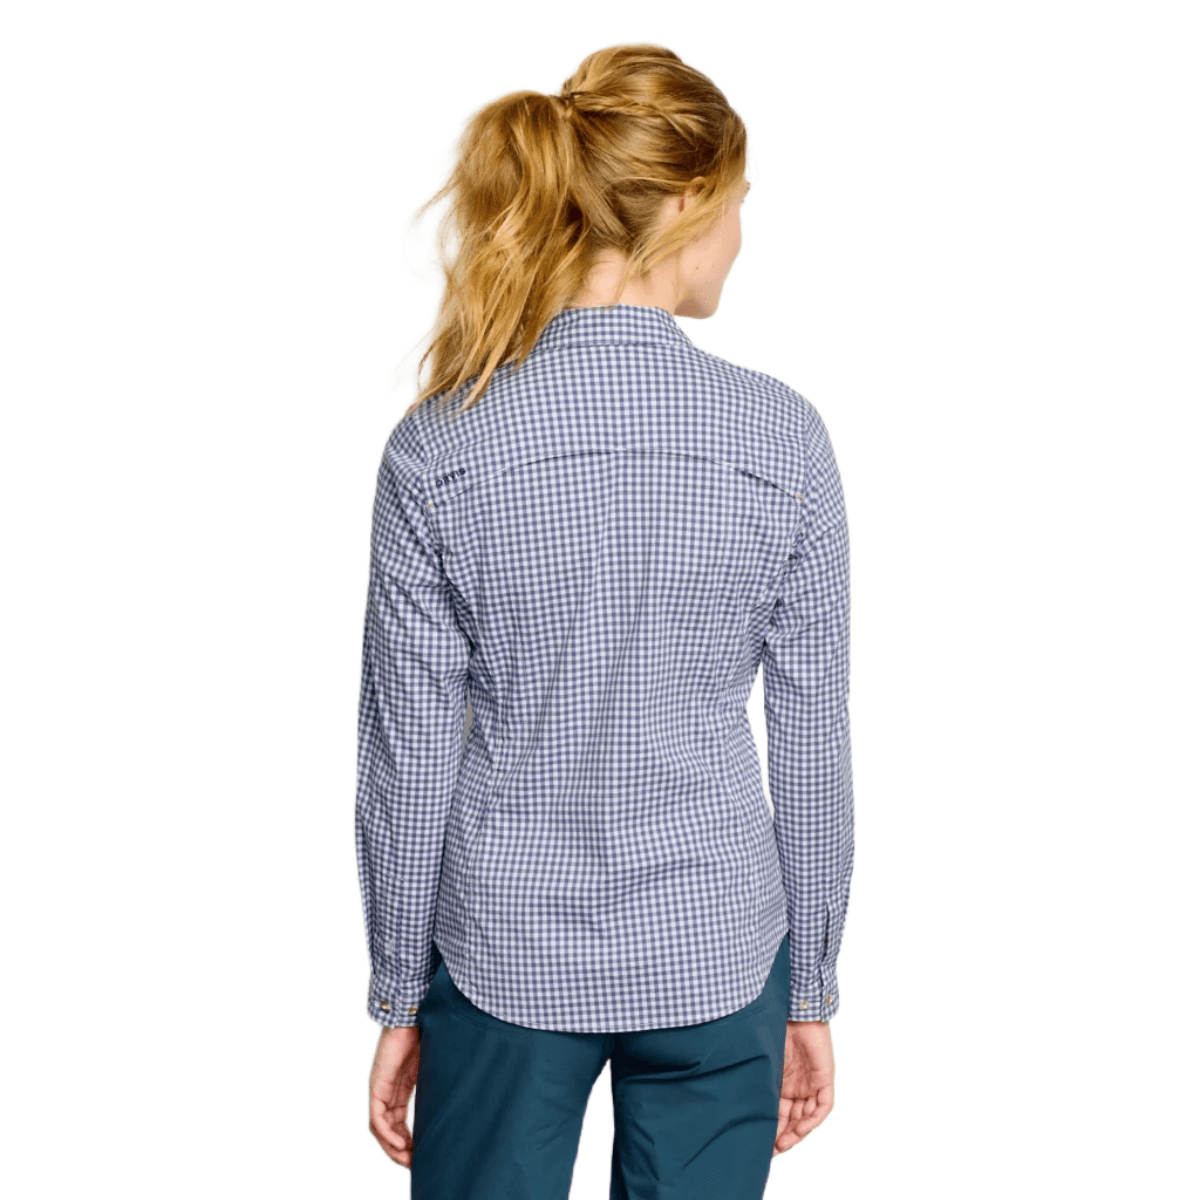 Orvis River Guide Shirt - Women's - Al's Sporting Goods: Your One-Stop Shop  for Outdoor Sports Gear & Apparel